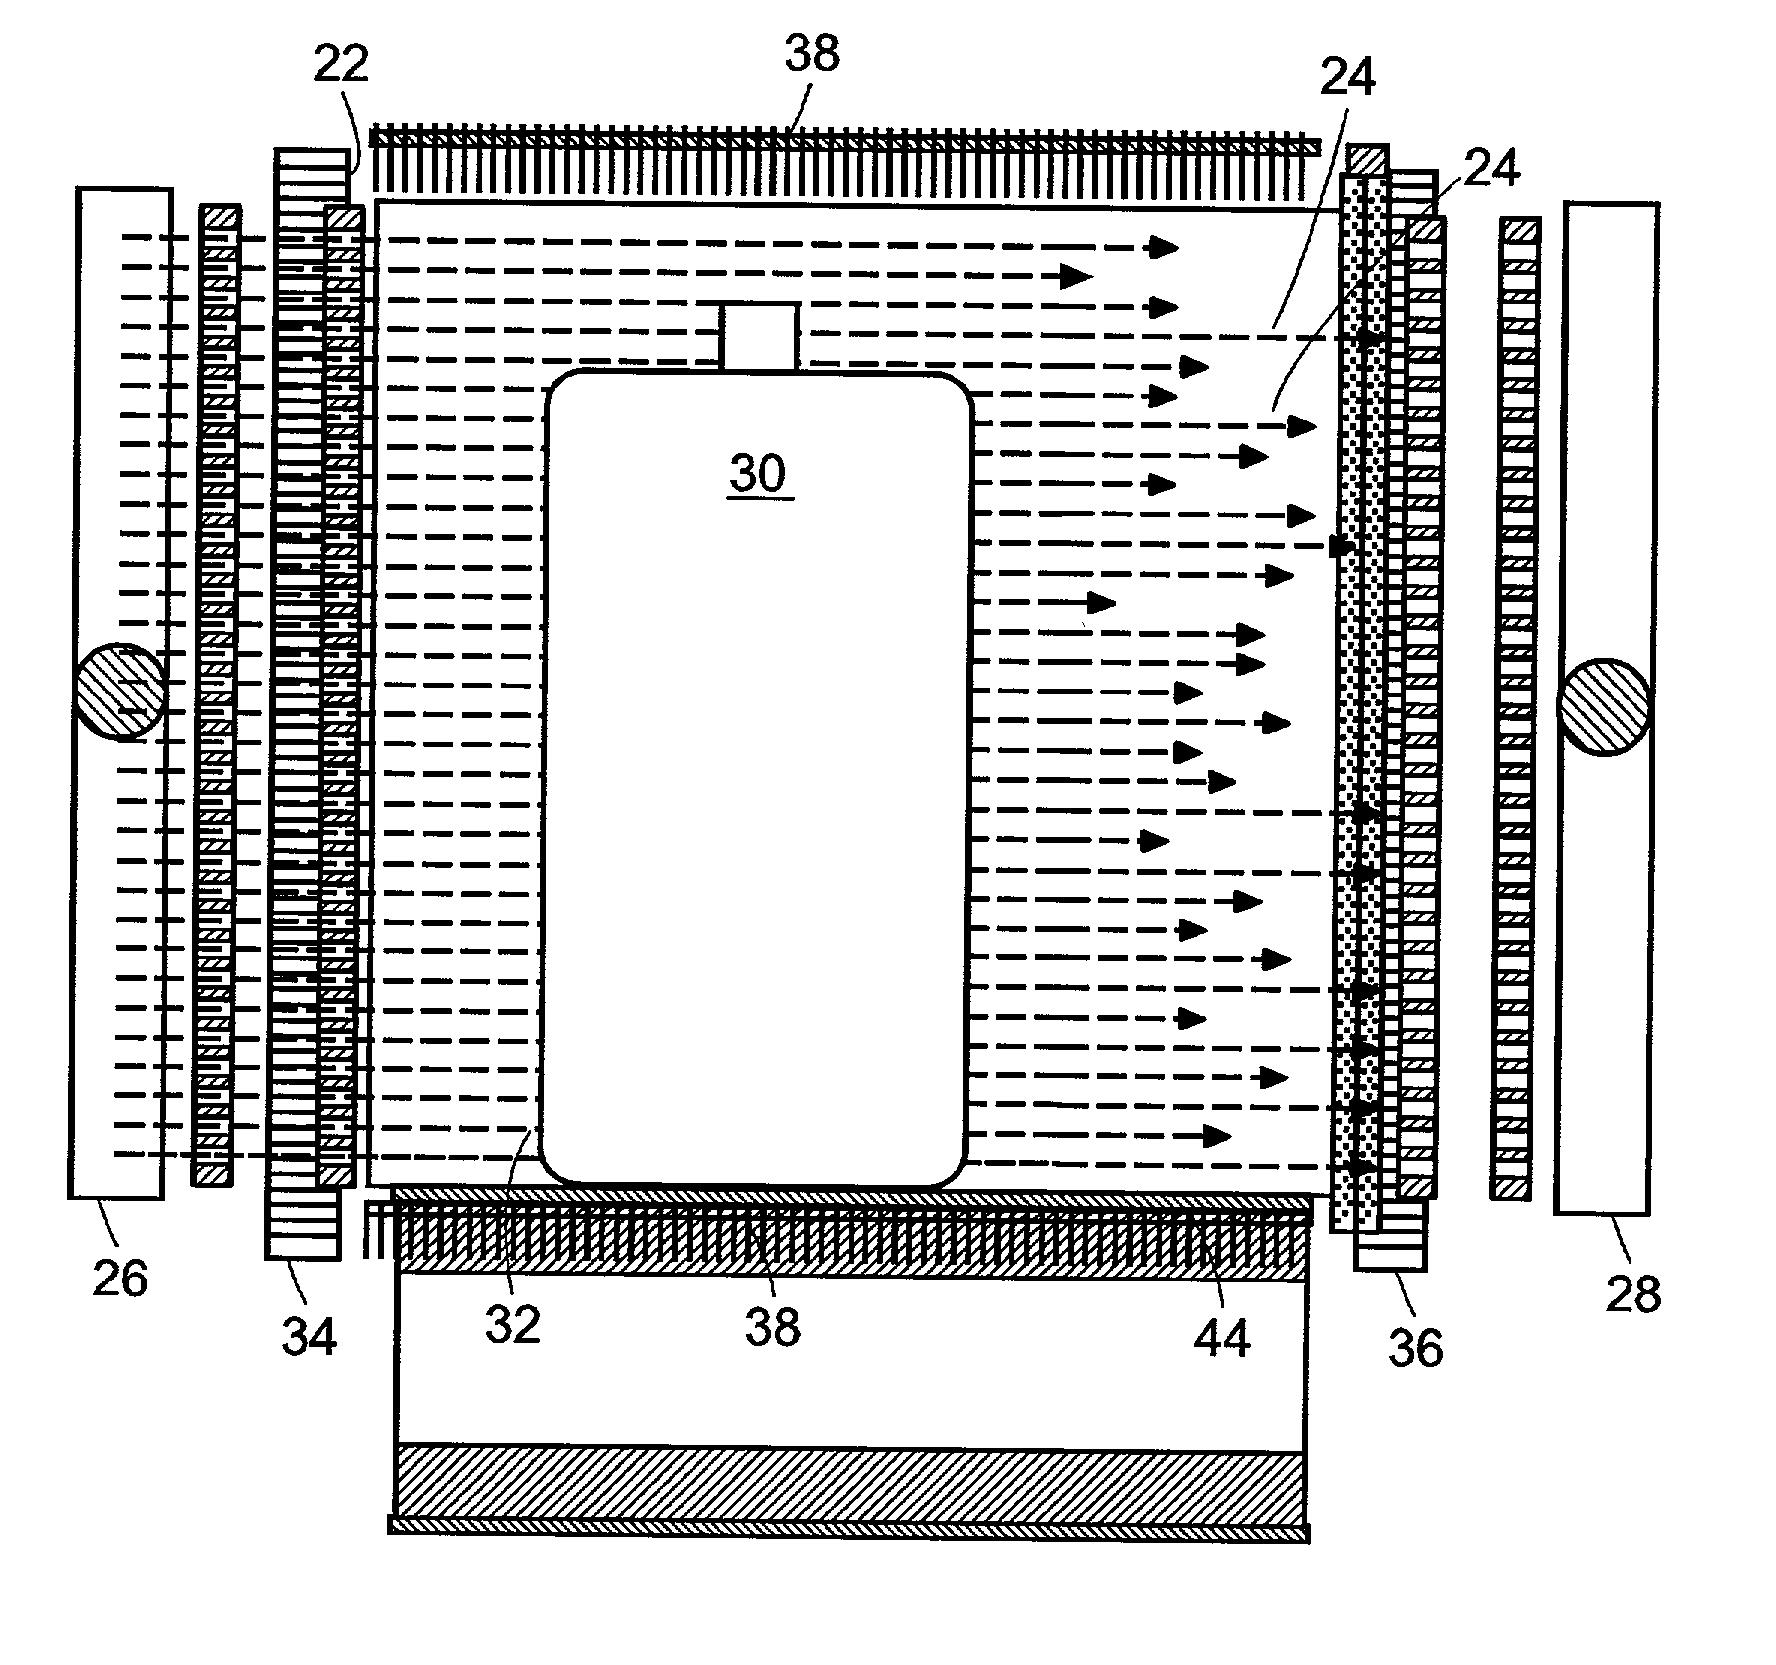 System for inspecting the contents of a container